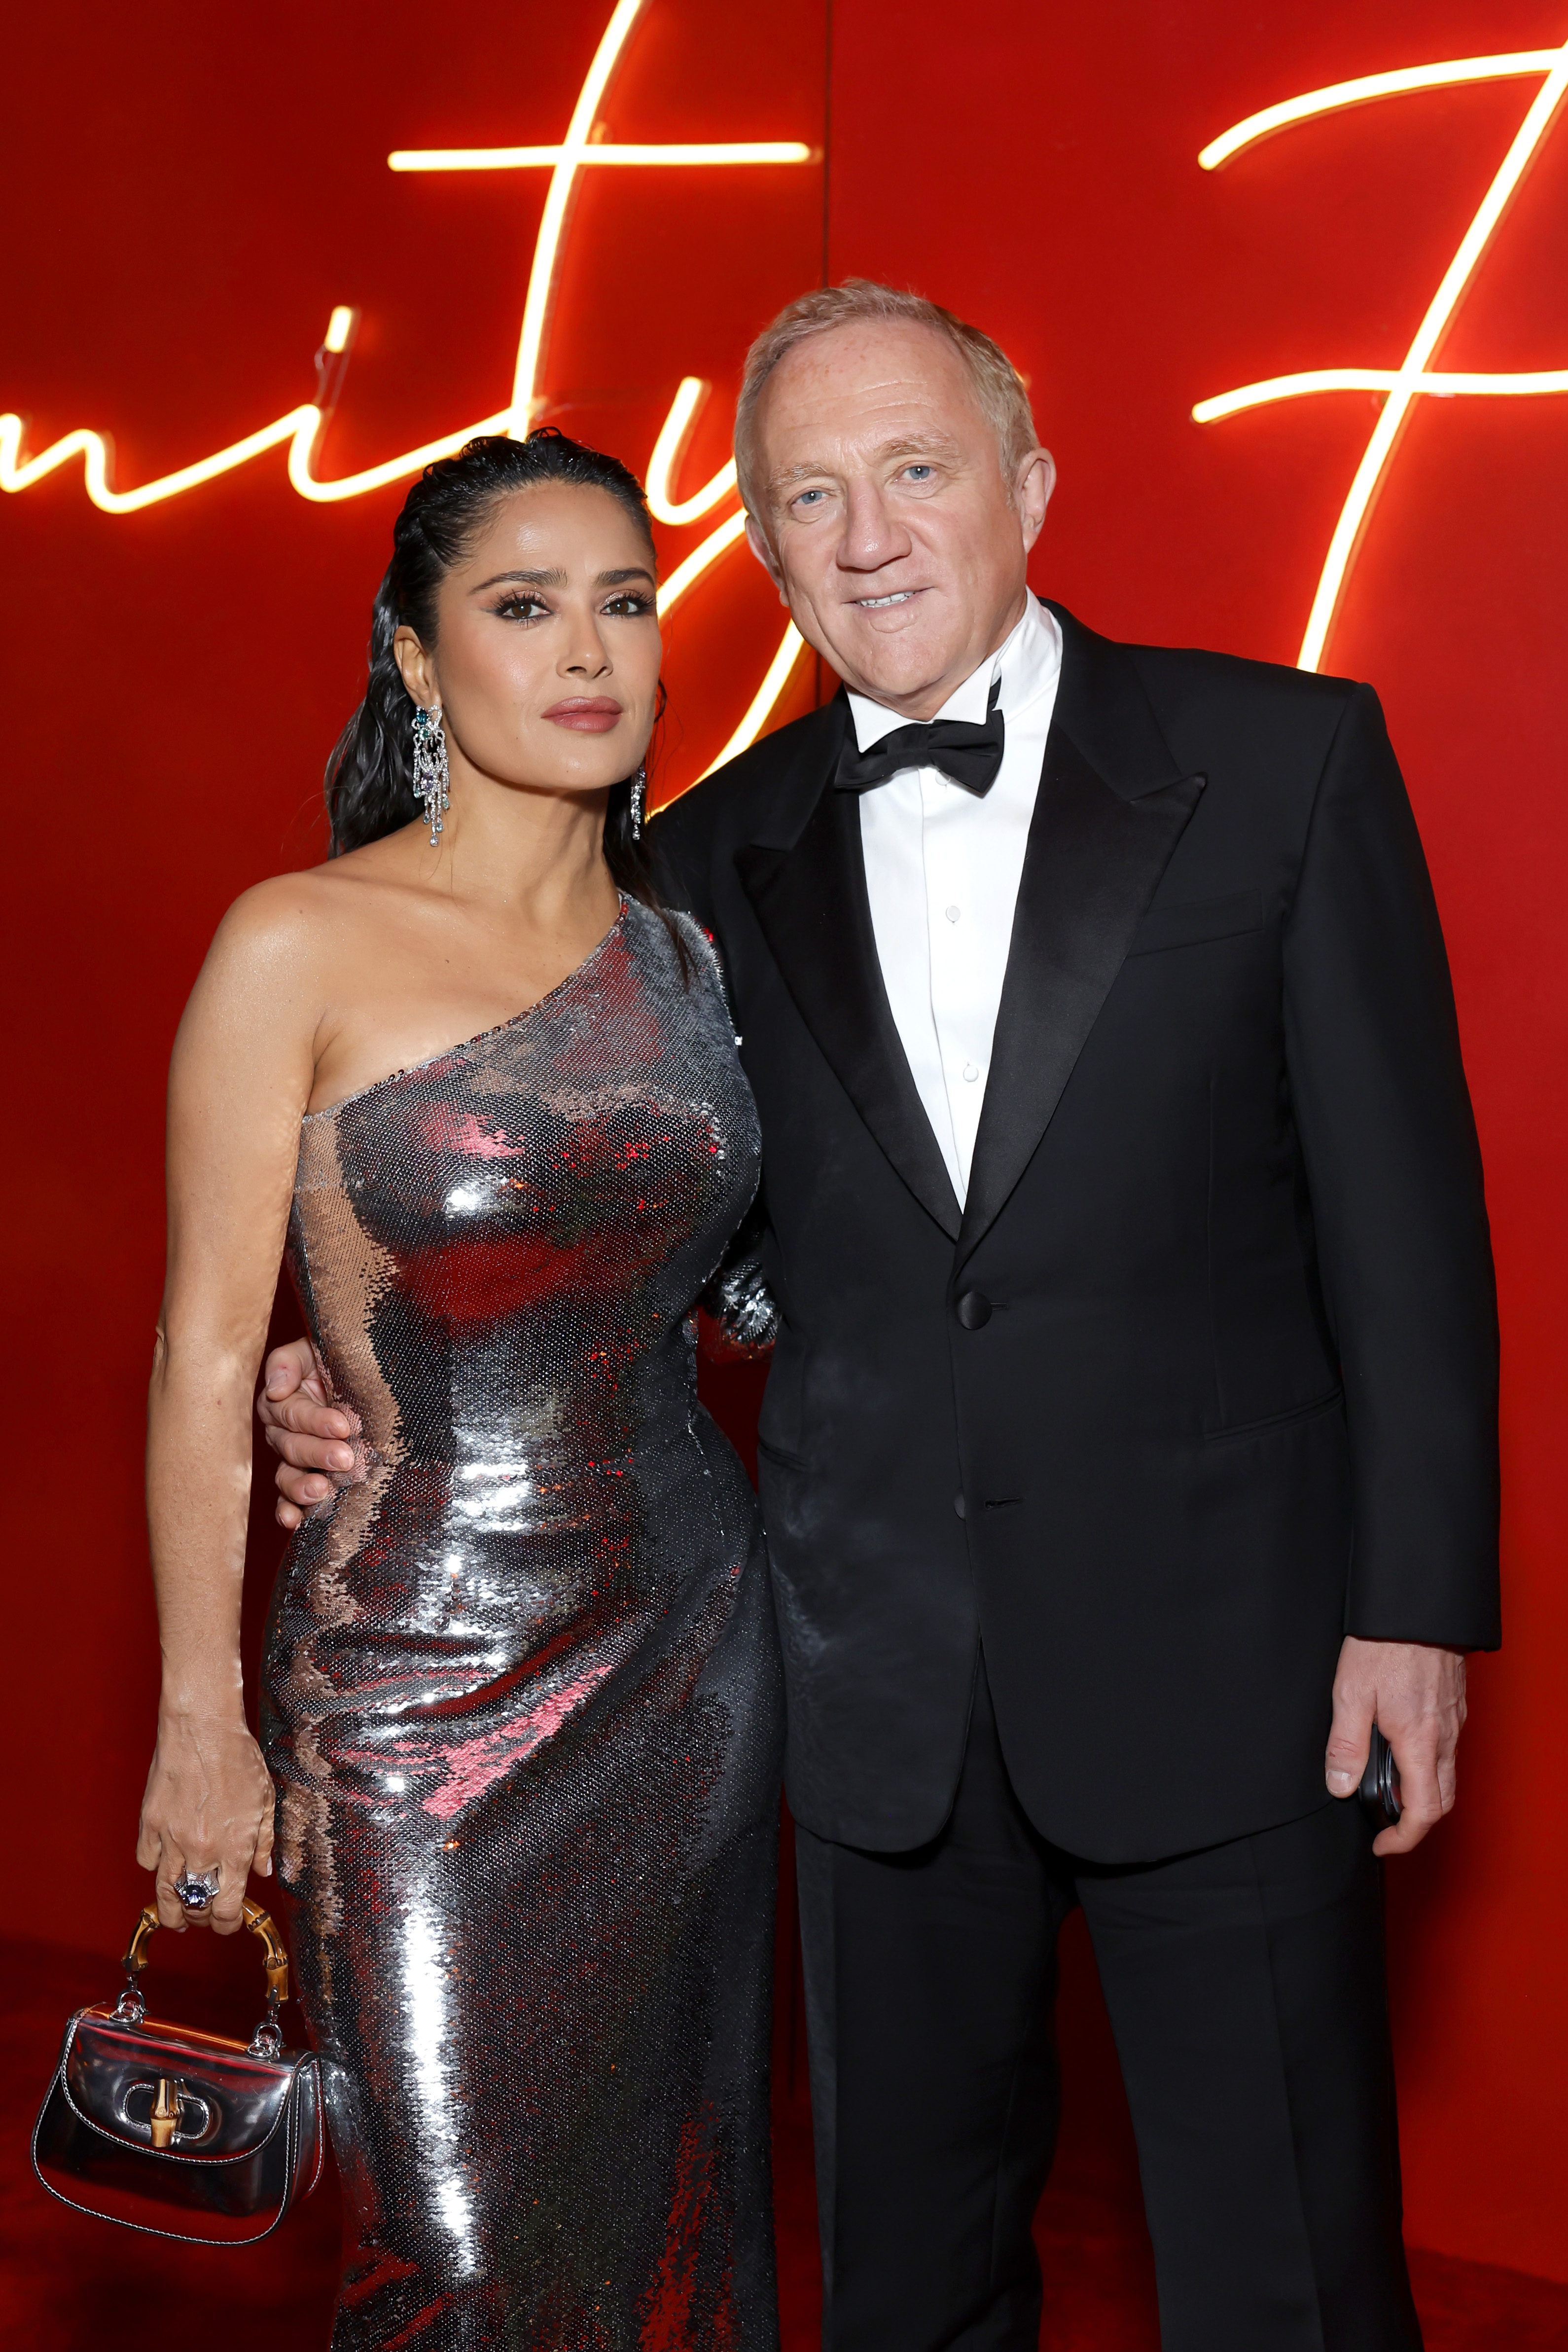 Salma Hayek Pinault and François-Henri Pinault attend the Vanity Fair Oscar Party Hosted By Radhika Jones in Beverly Hills, California, on March 10, 2024. | Source: Getty Images